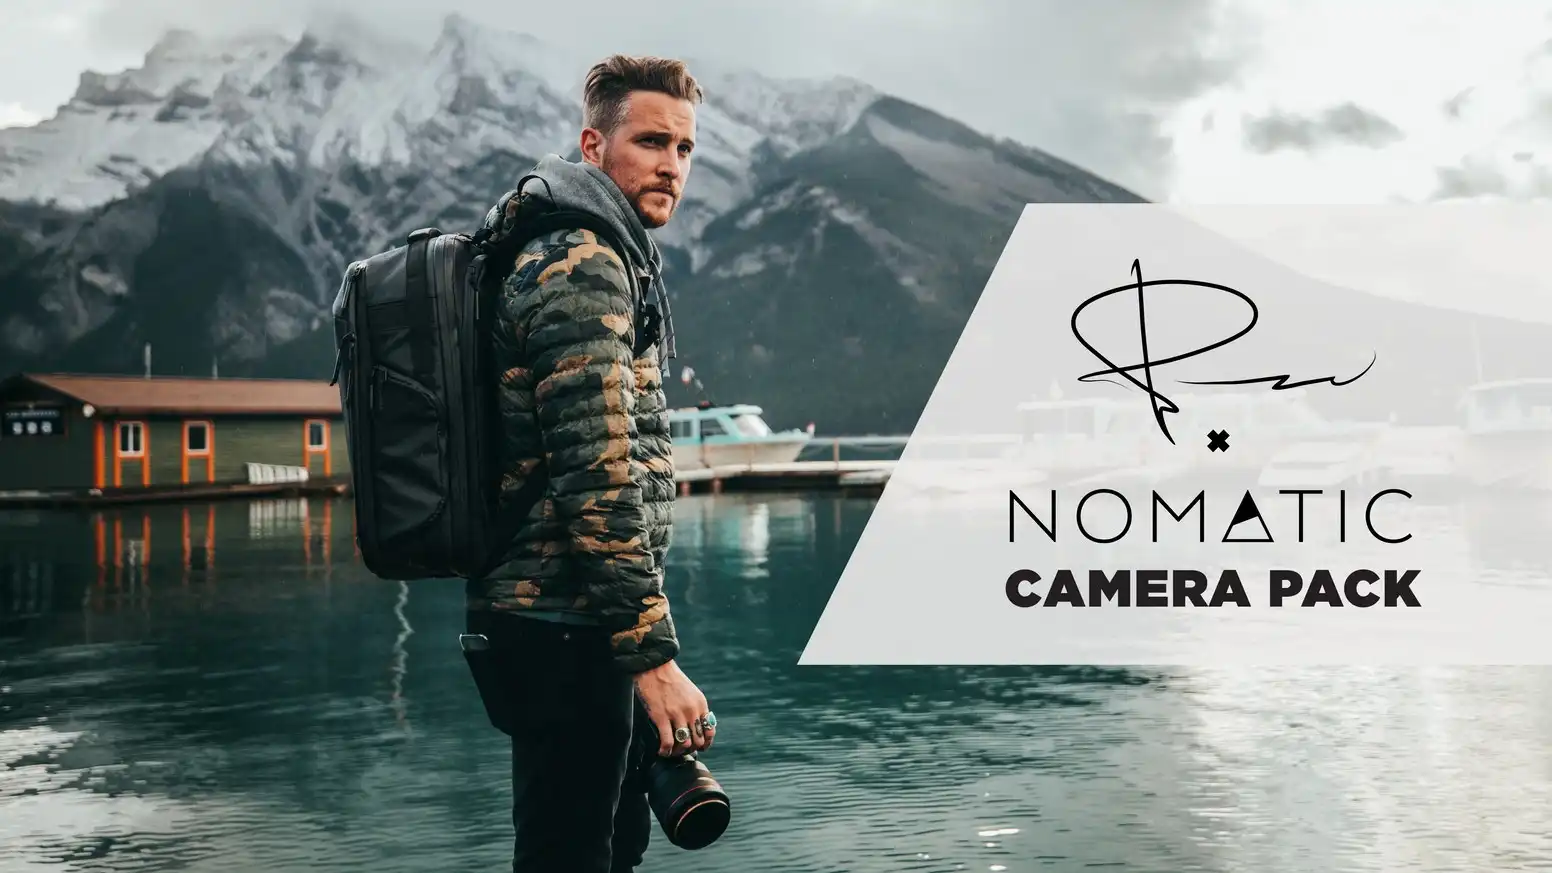 Peter McKinnon Nomatic Camera Bag 3 Month Review image 